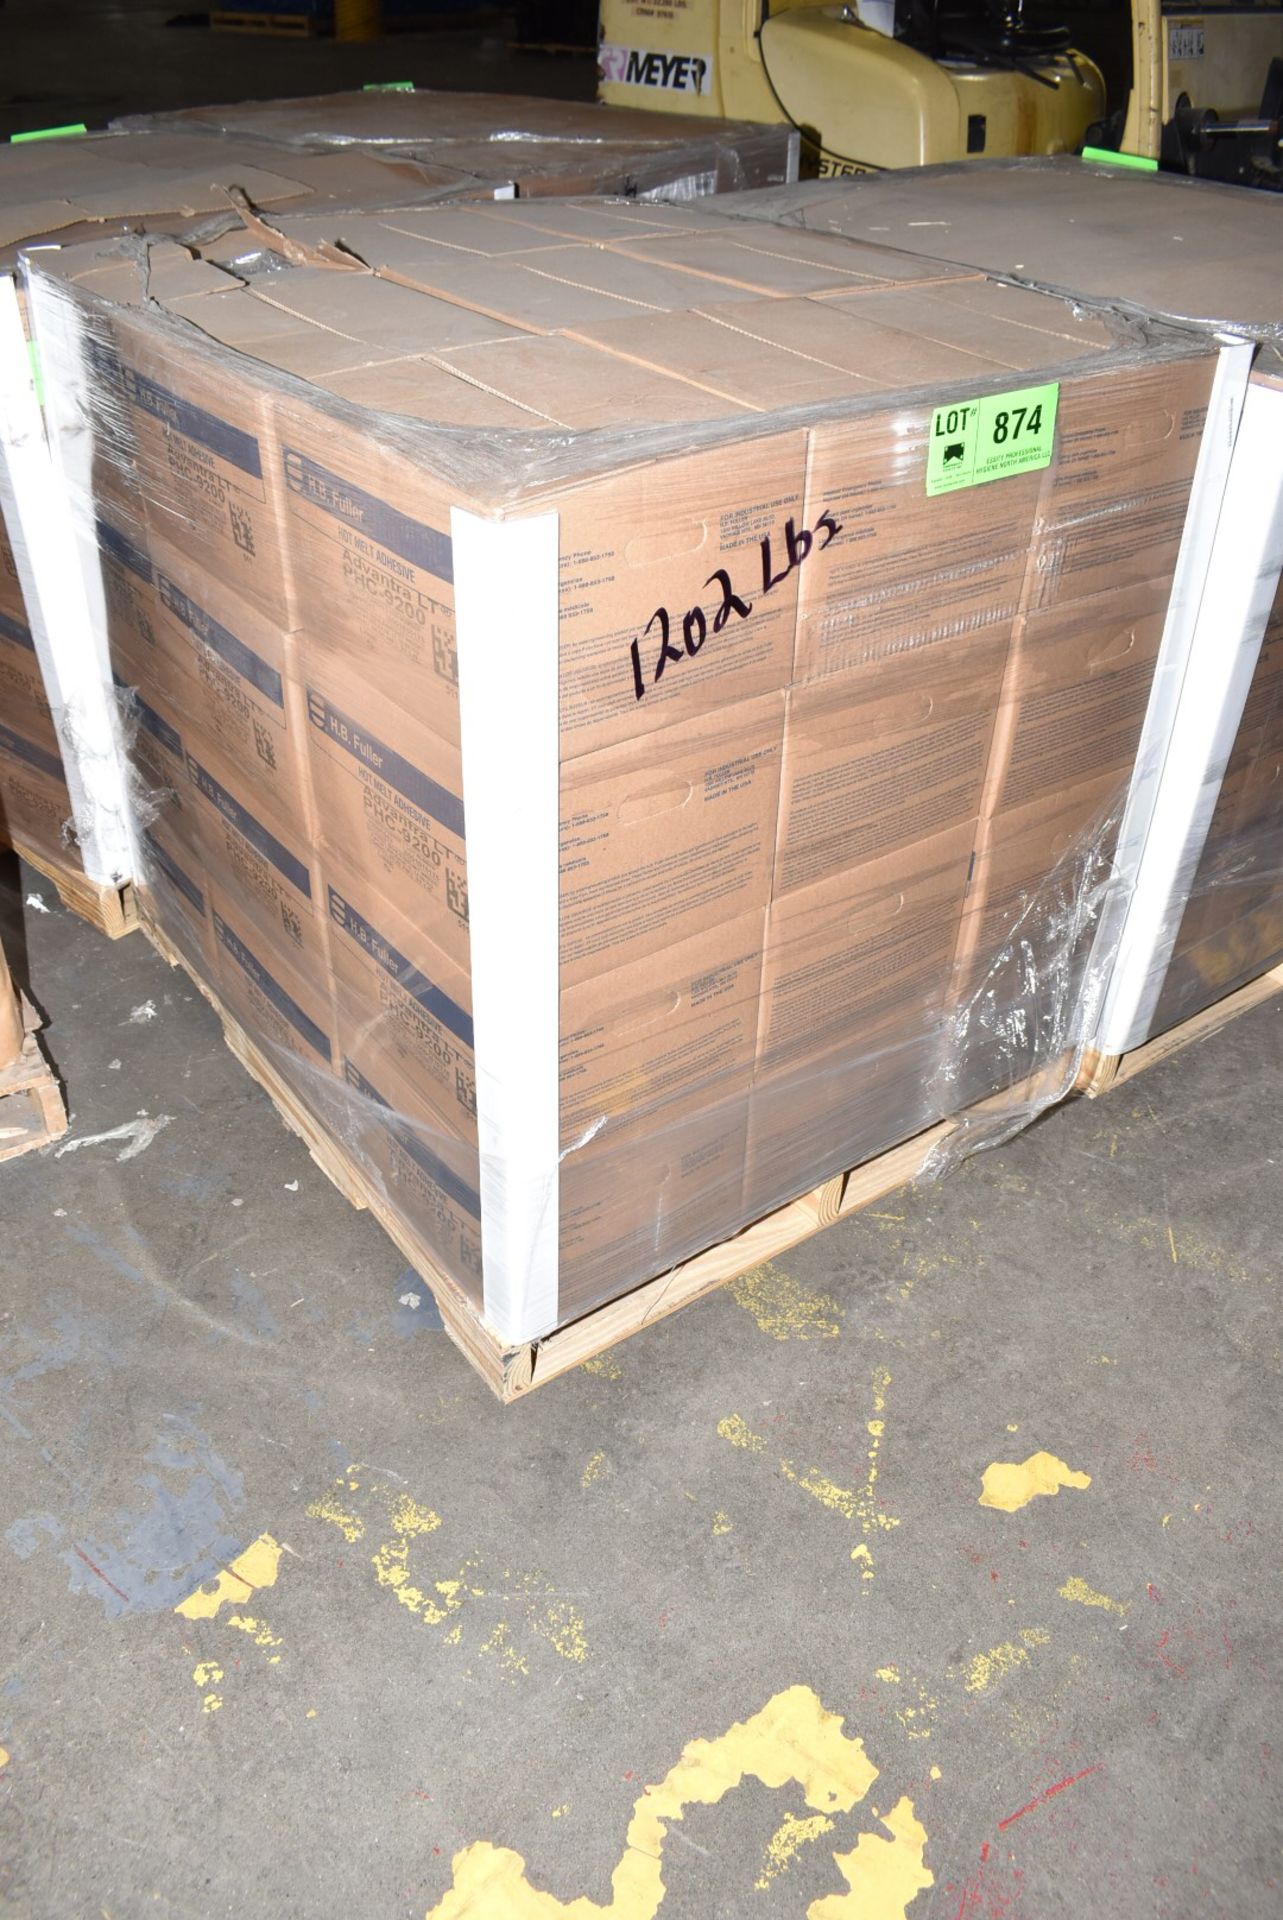 LOT/ PALLET OF ADVANTRA PHC-9200 FOOD PACKAGING ADHESIVE [RIGGING FEE FOR LOT #874 - $25 USD PLUS